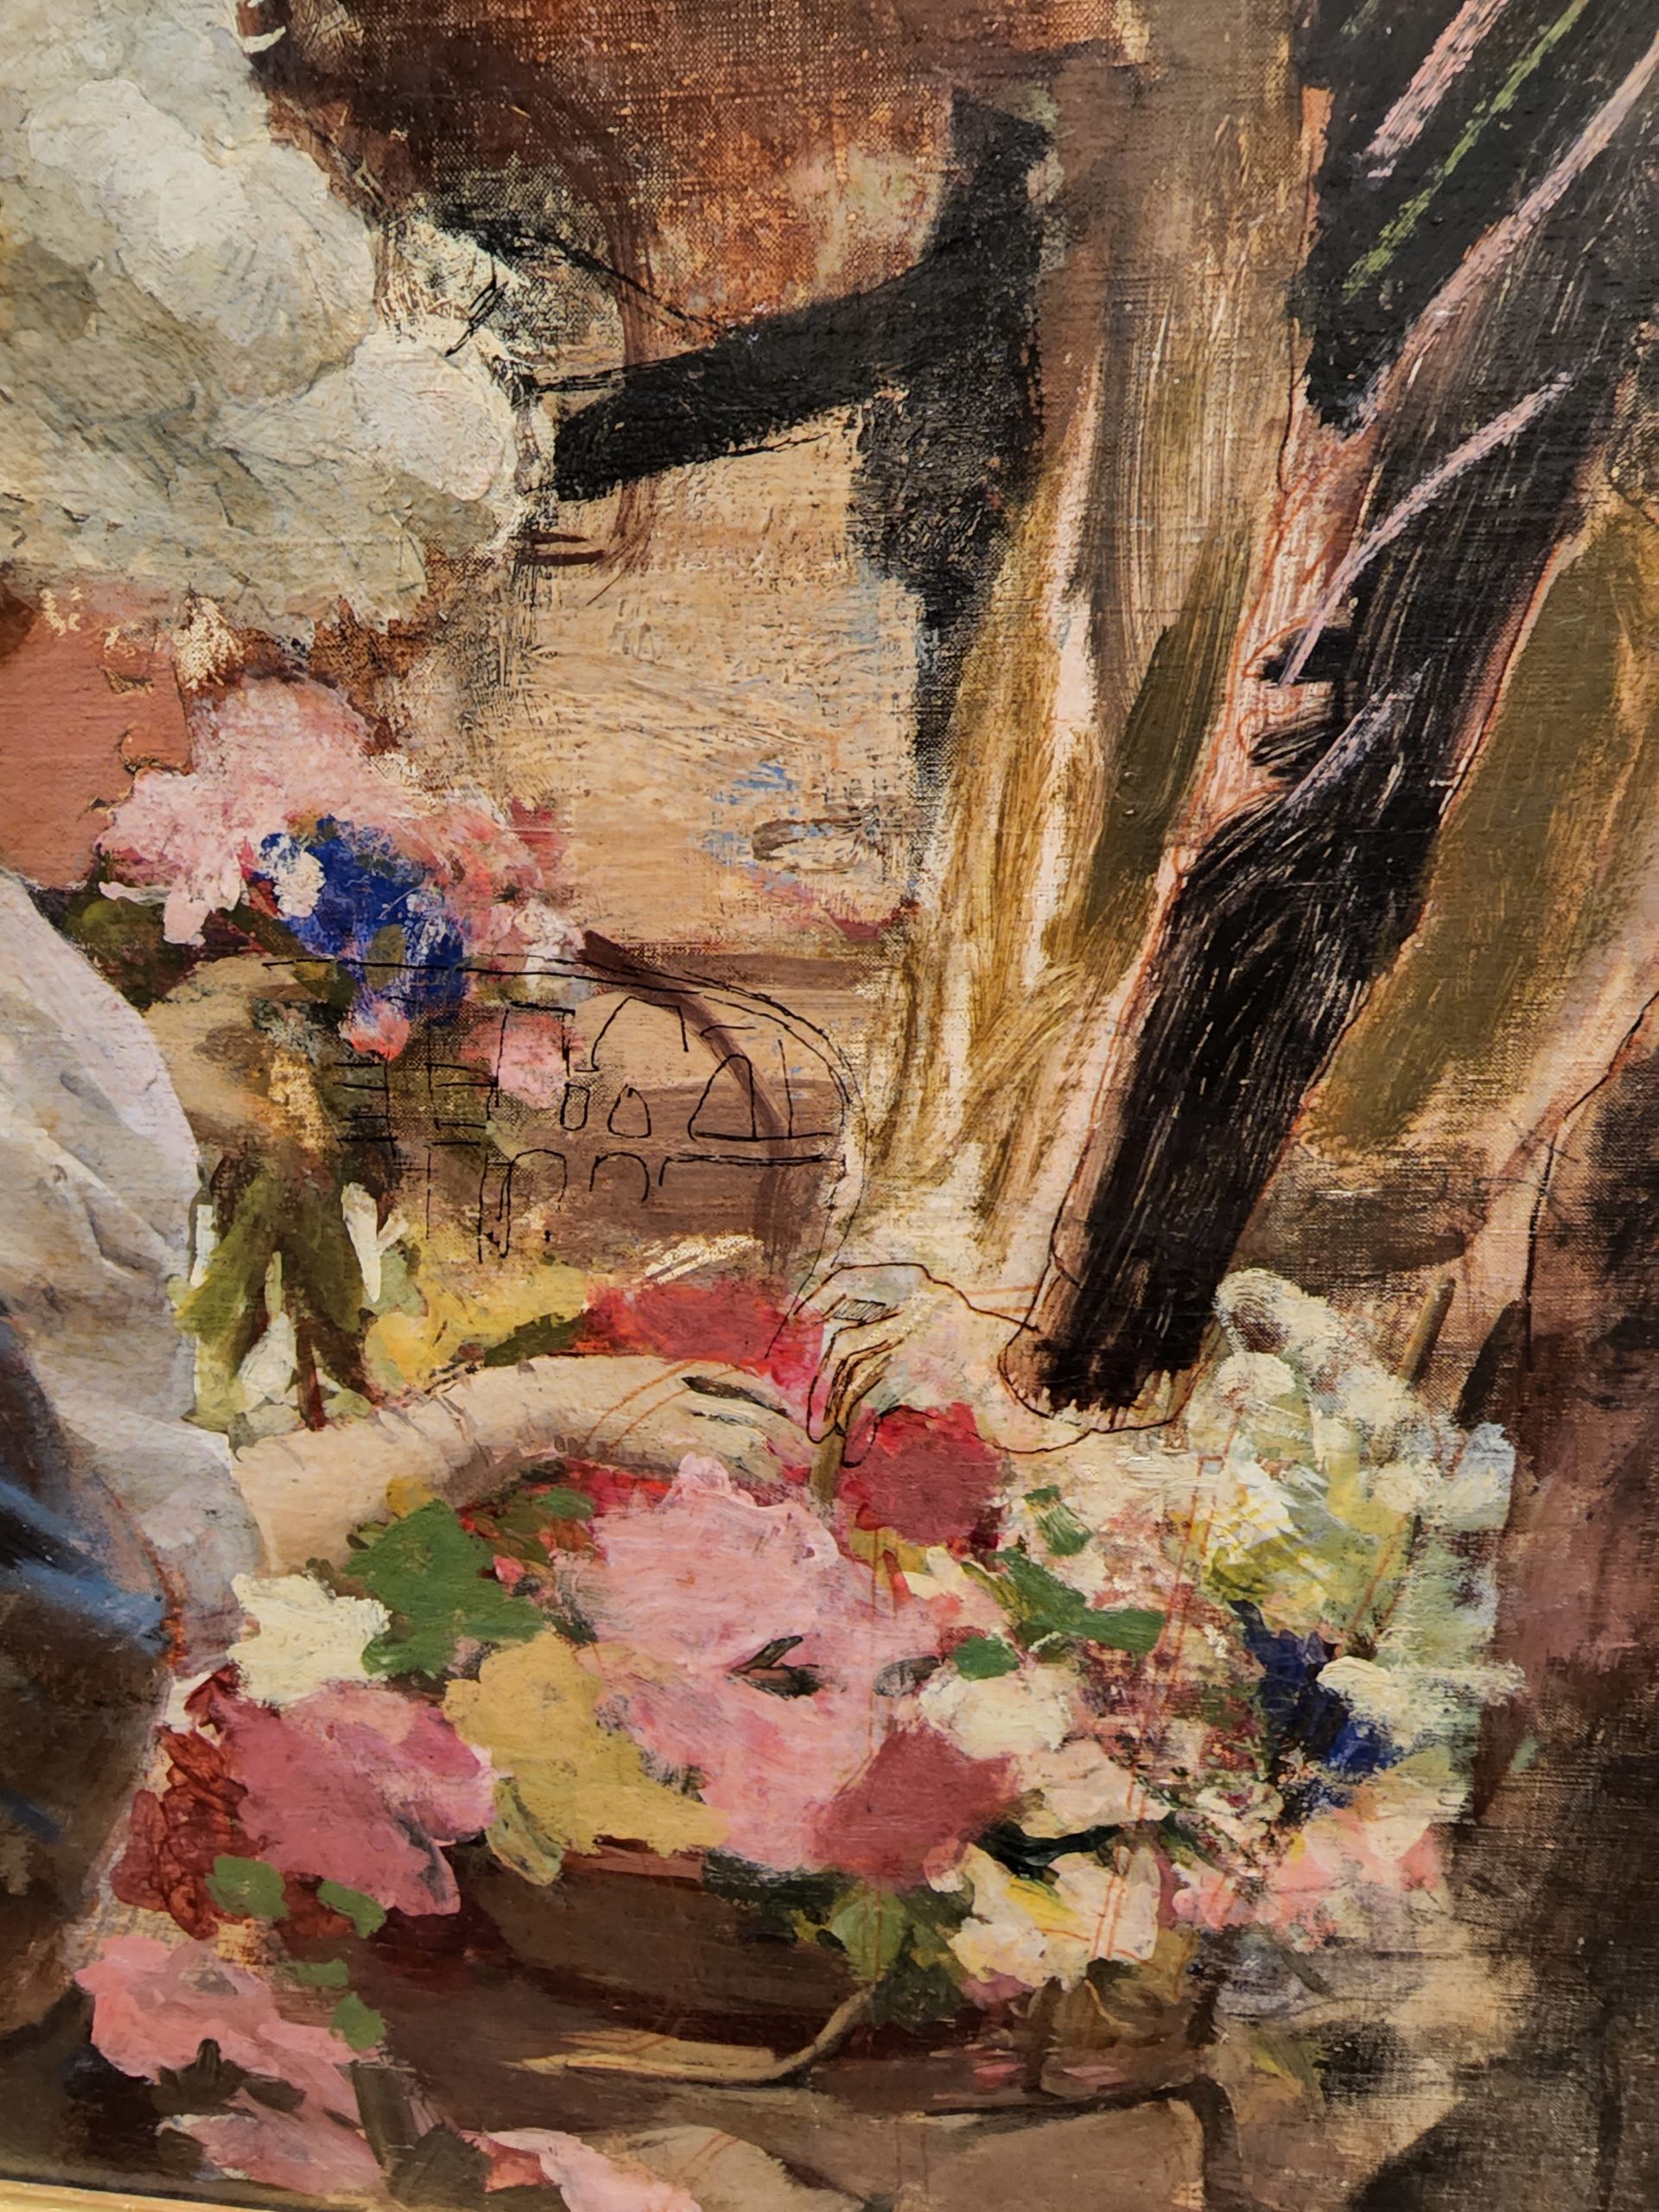 detail of a painting showing hands and flowers